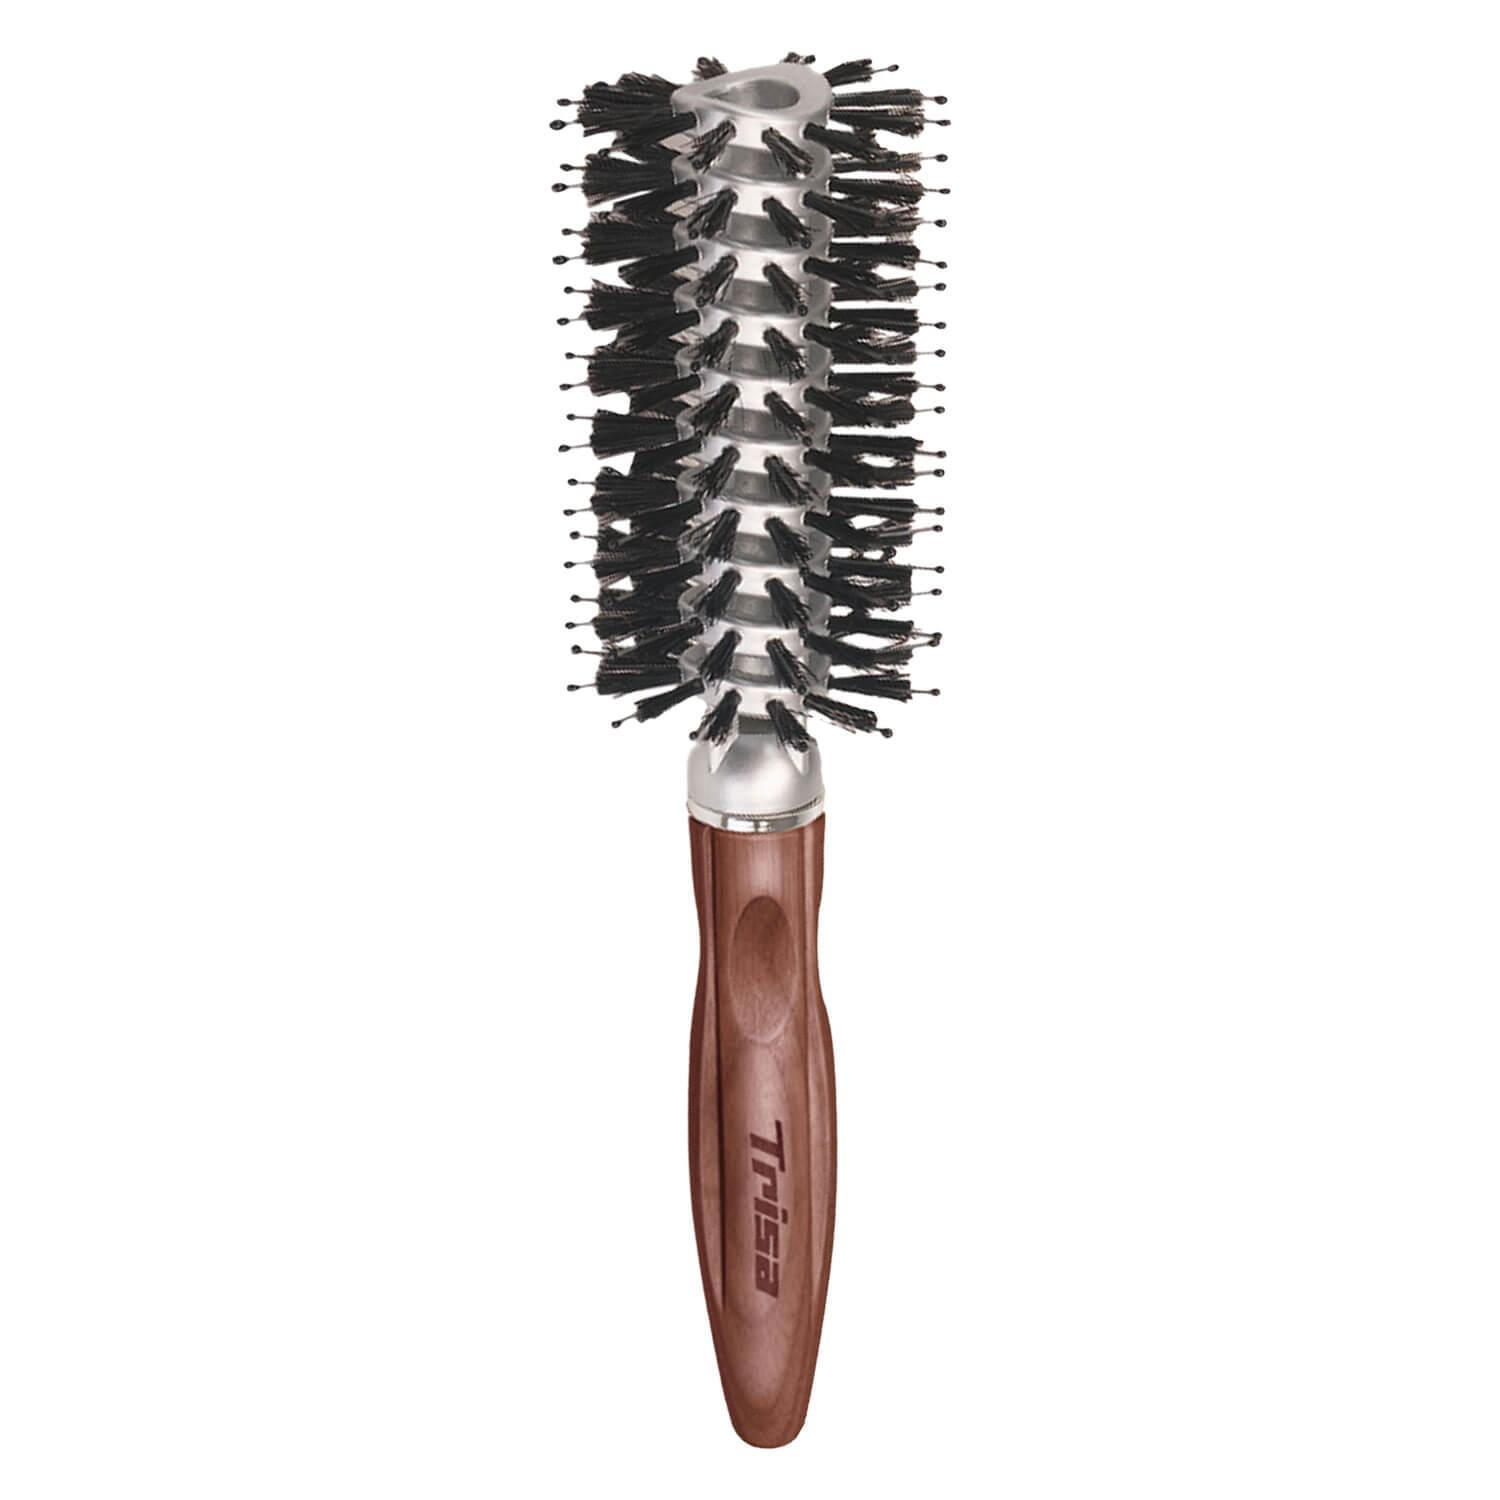 Trisa Hair Care - Natural Care Brilliance & Volume Boar Bristles & Rounded Styling Pins